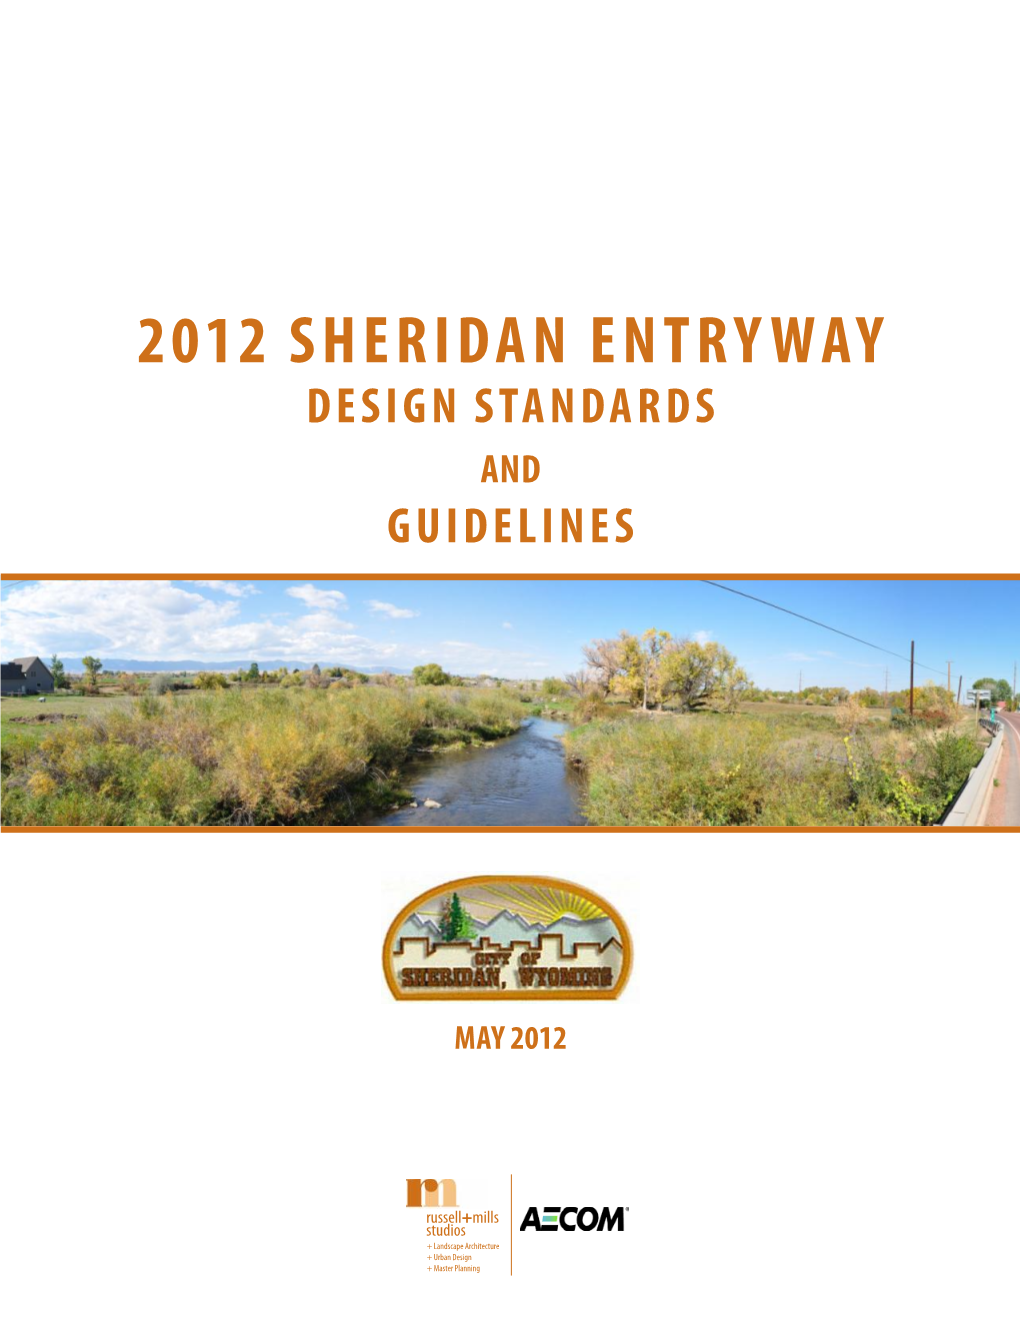 2012 Sheridan Entryway Design Standards and Guidelines